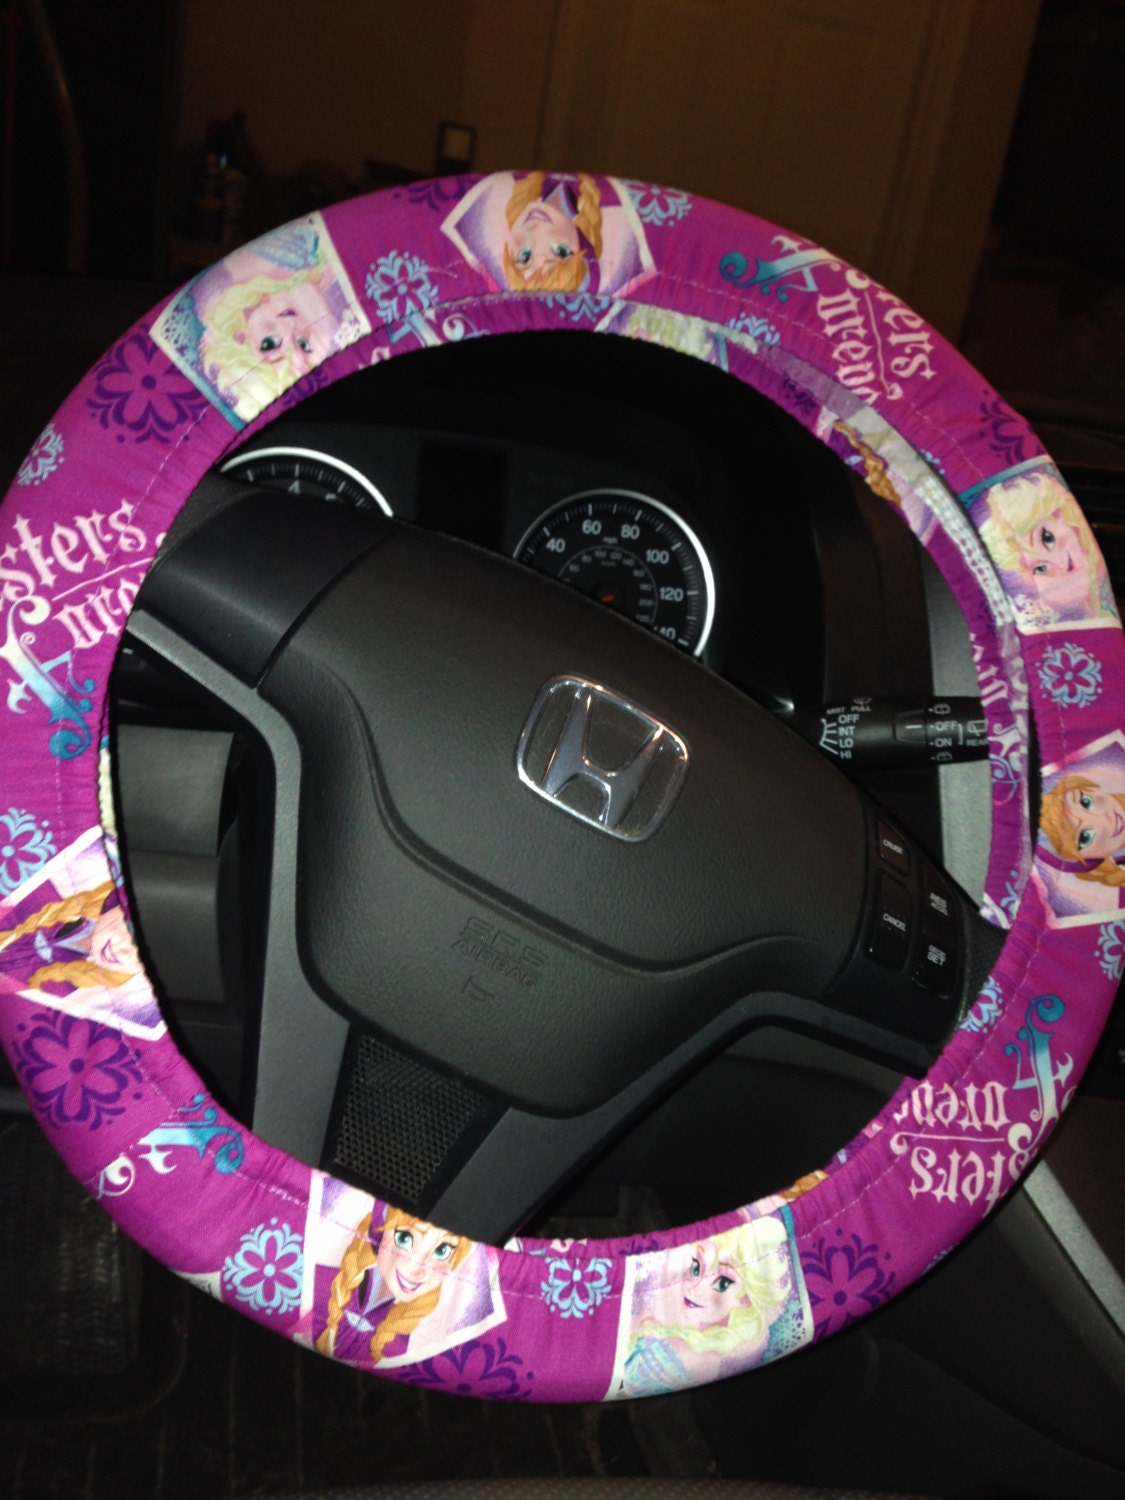 Steering Wheel Cover made with Disney Frozen by